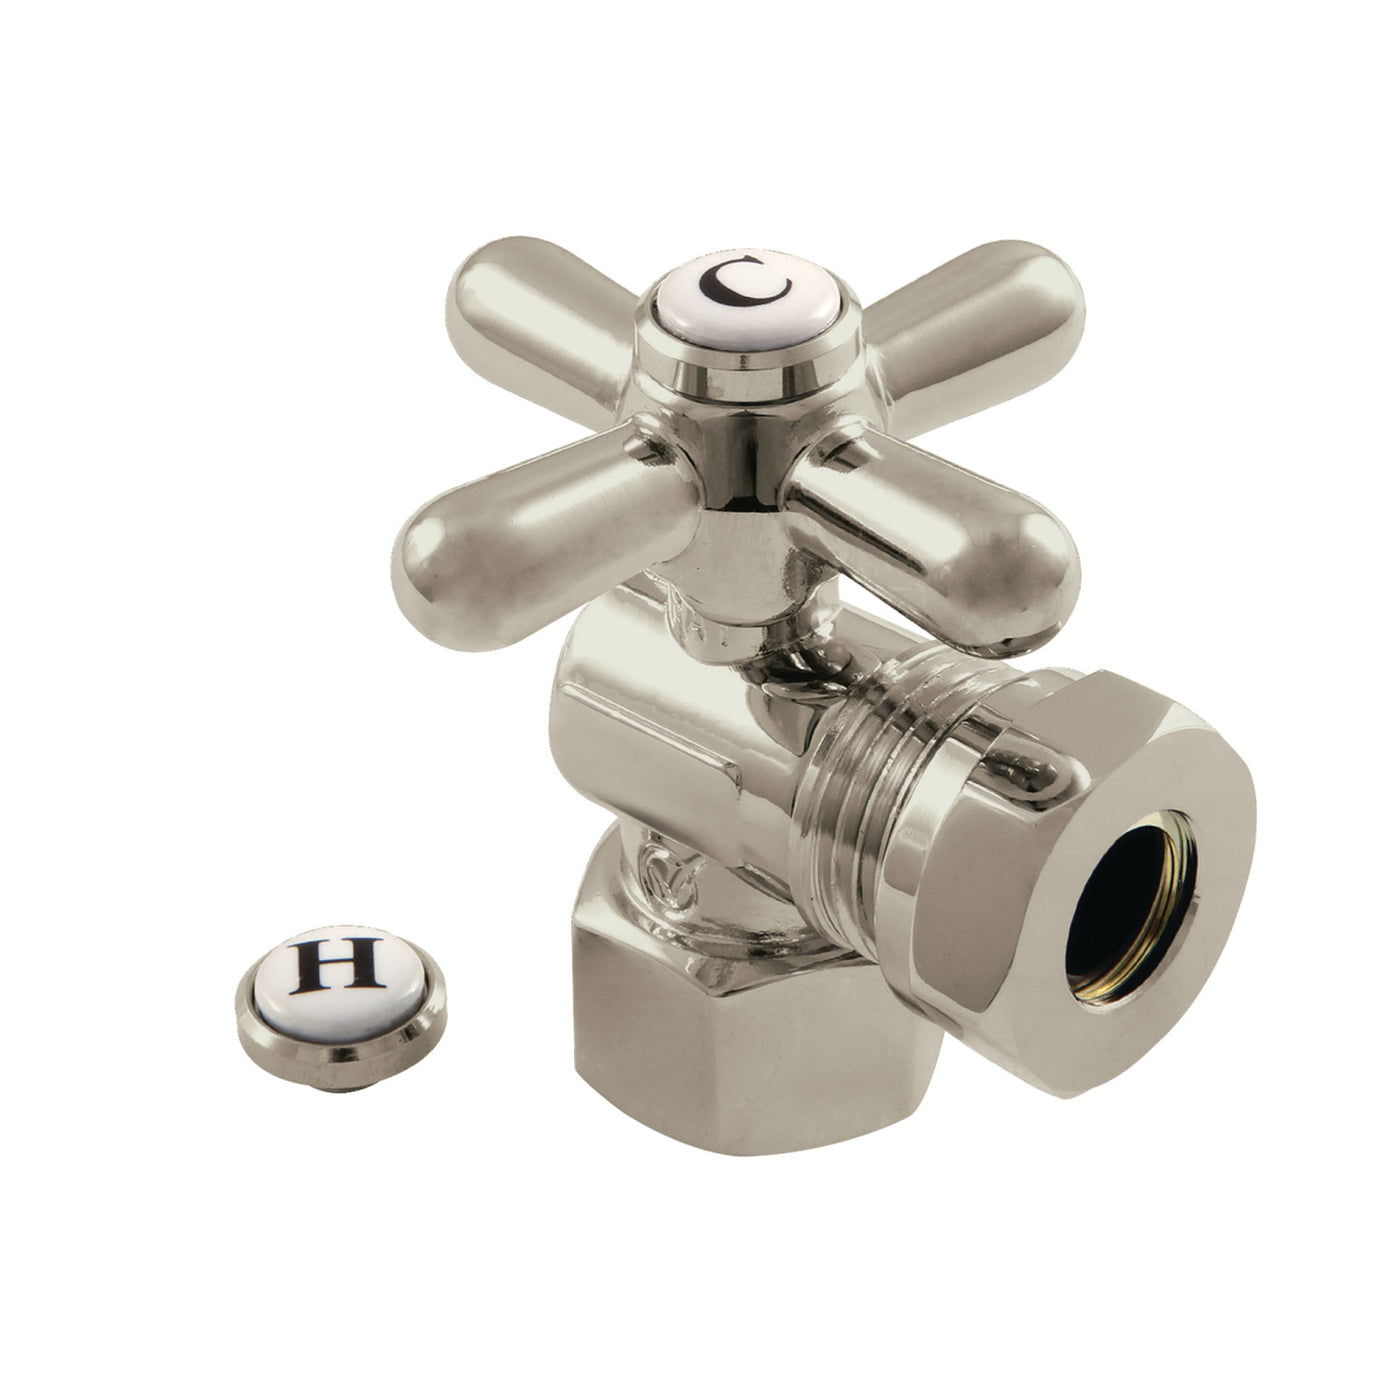 Elements of Design ECC44108X 1/2-Inch FIP x 1/2-Inch or 7/16-Inch Slip Joint Angle Stop Valve, Brushed Nickel